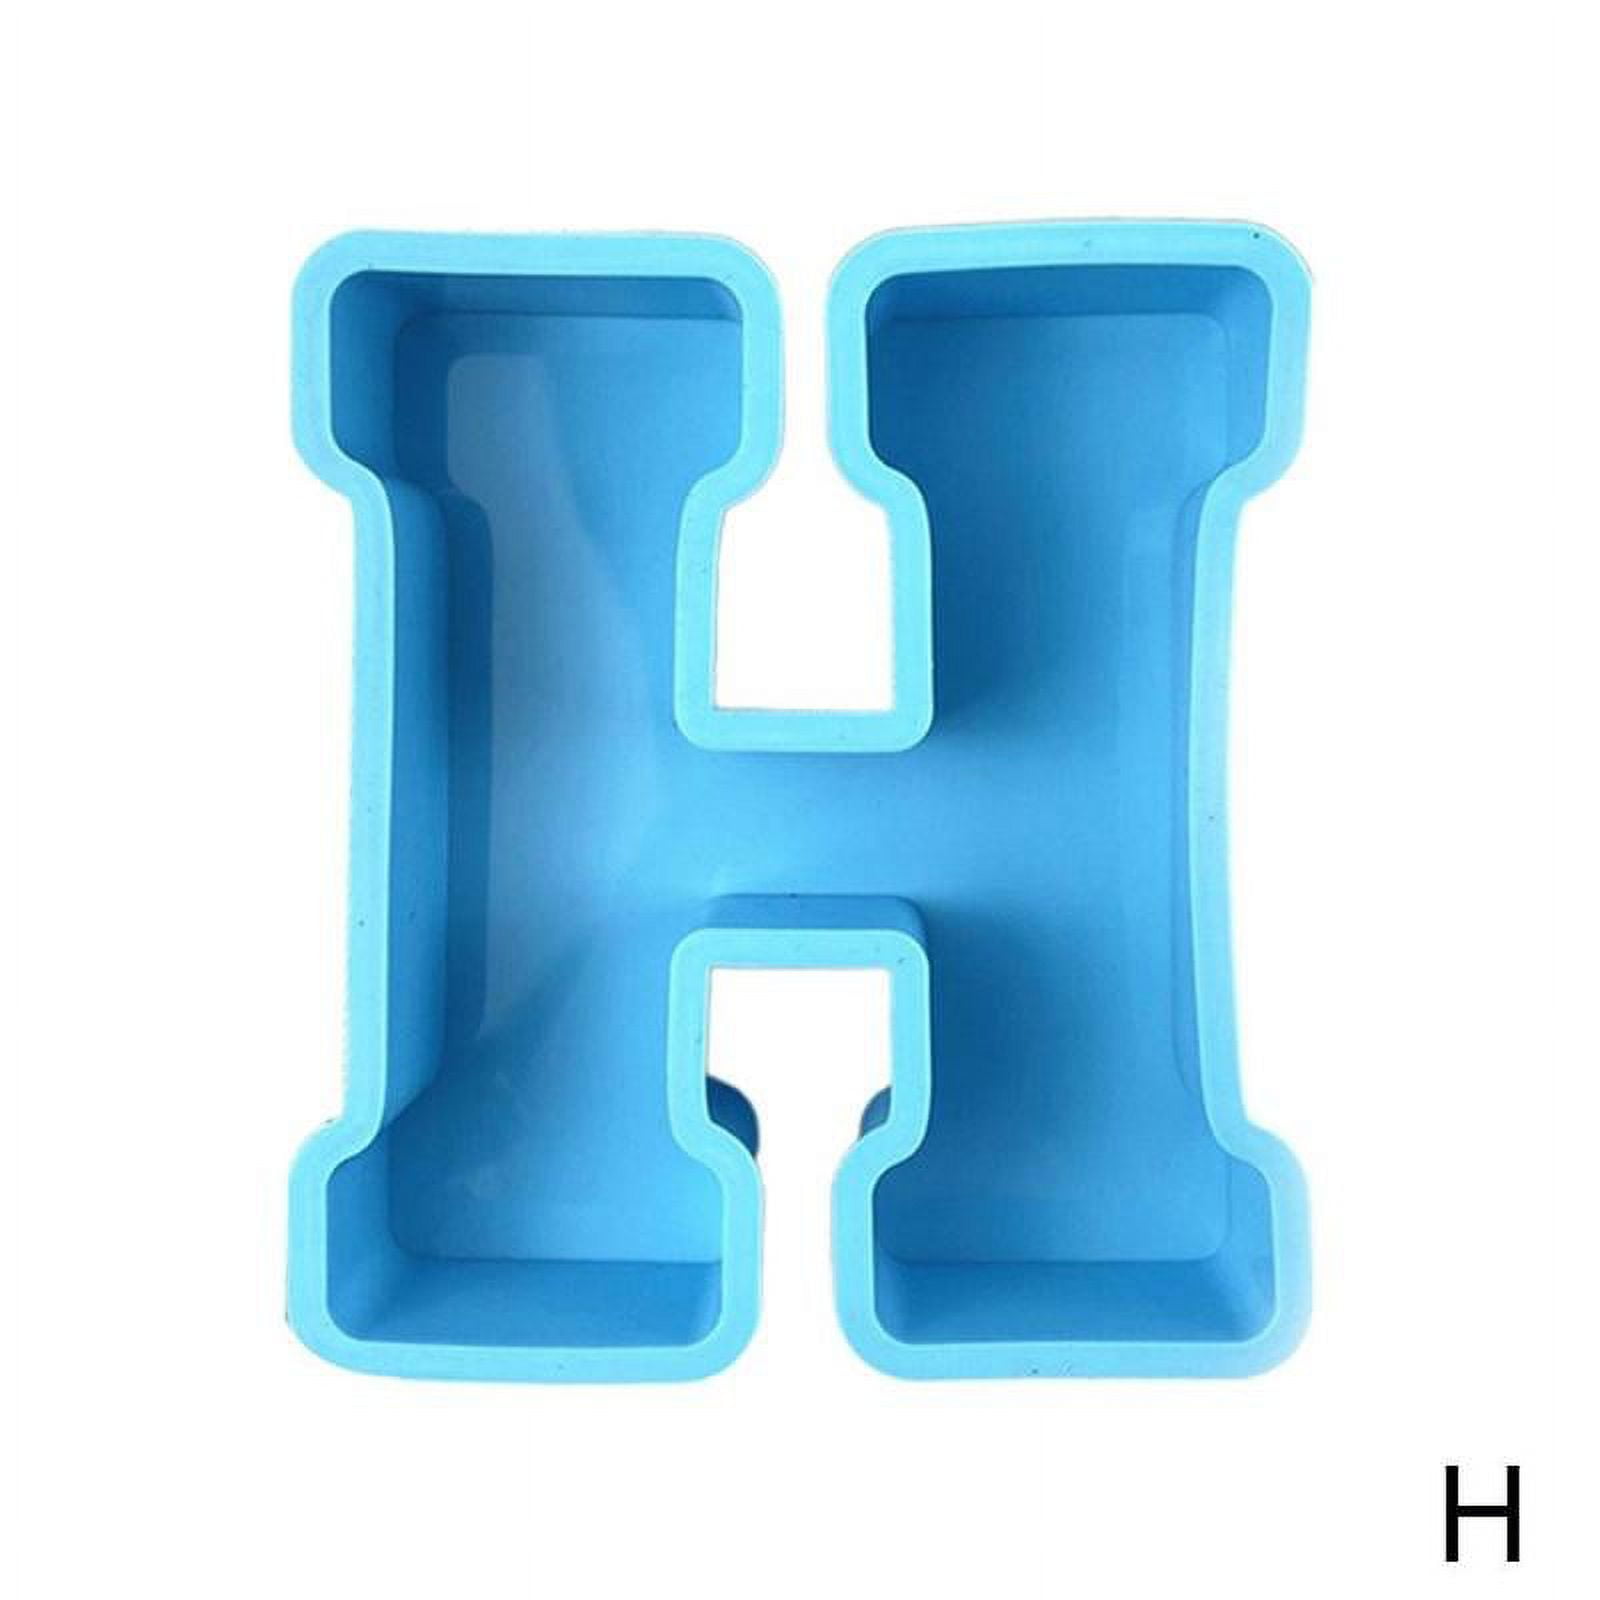 Silicone Alphabet Molds Large Letter Molds Epoxy Resin Molds For